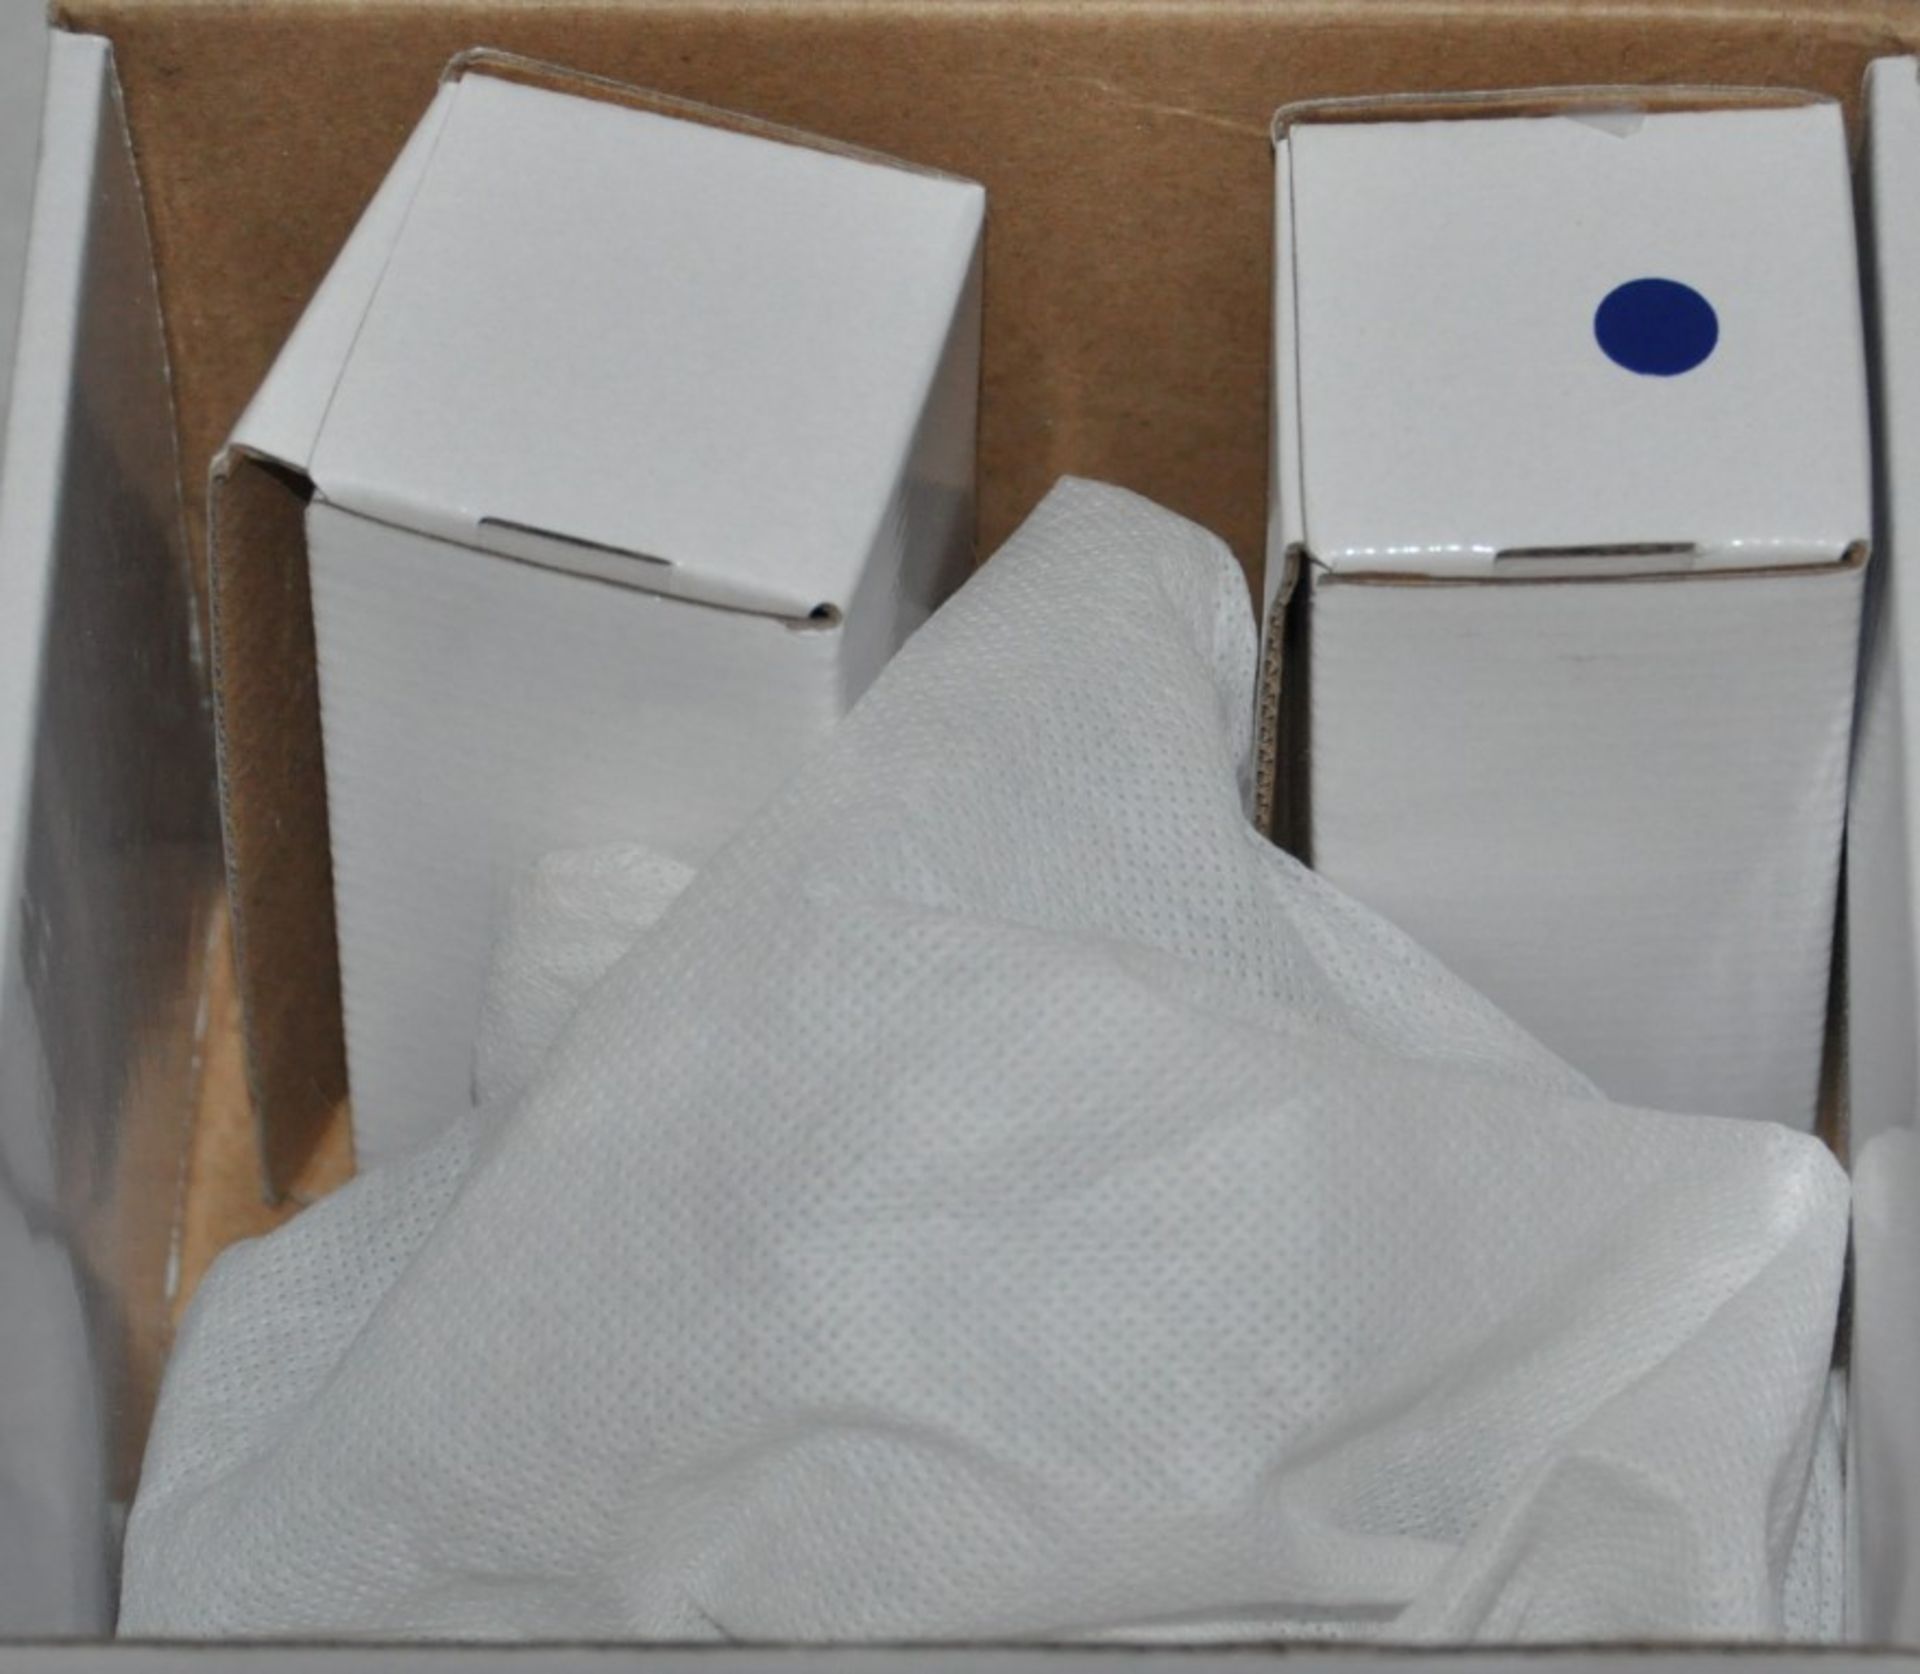 1 x Chrome Bath Filler – Used Commercial Samples - Boxed in Good Condition – Complete – Model : - Image 4 of 6